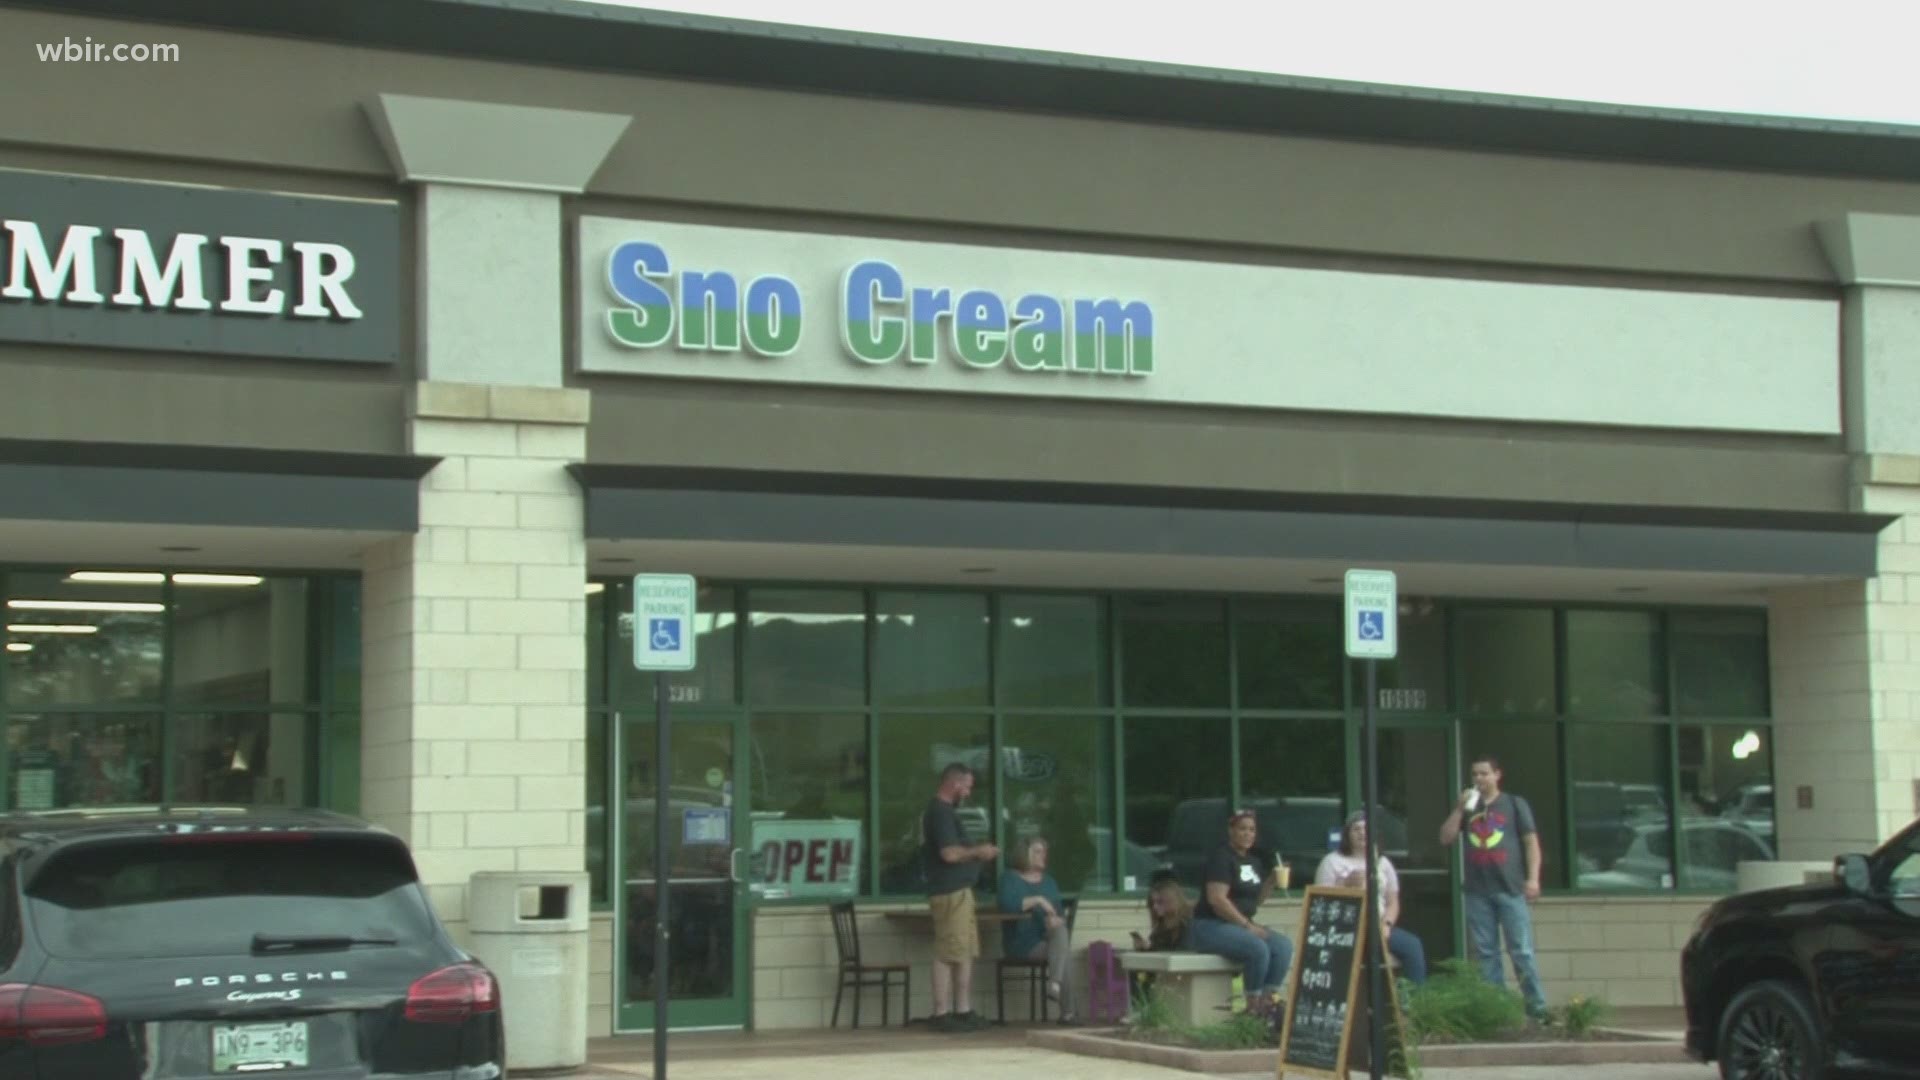 Sno Cream, a popular dessert destination in Knoxville, is fighting to keep its doors open as the owner faces health issues.